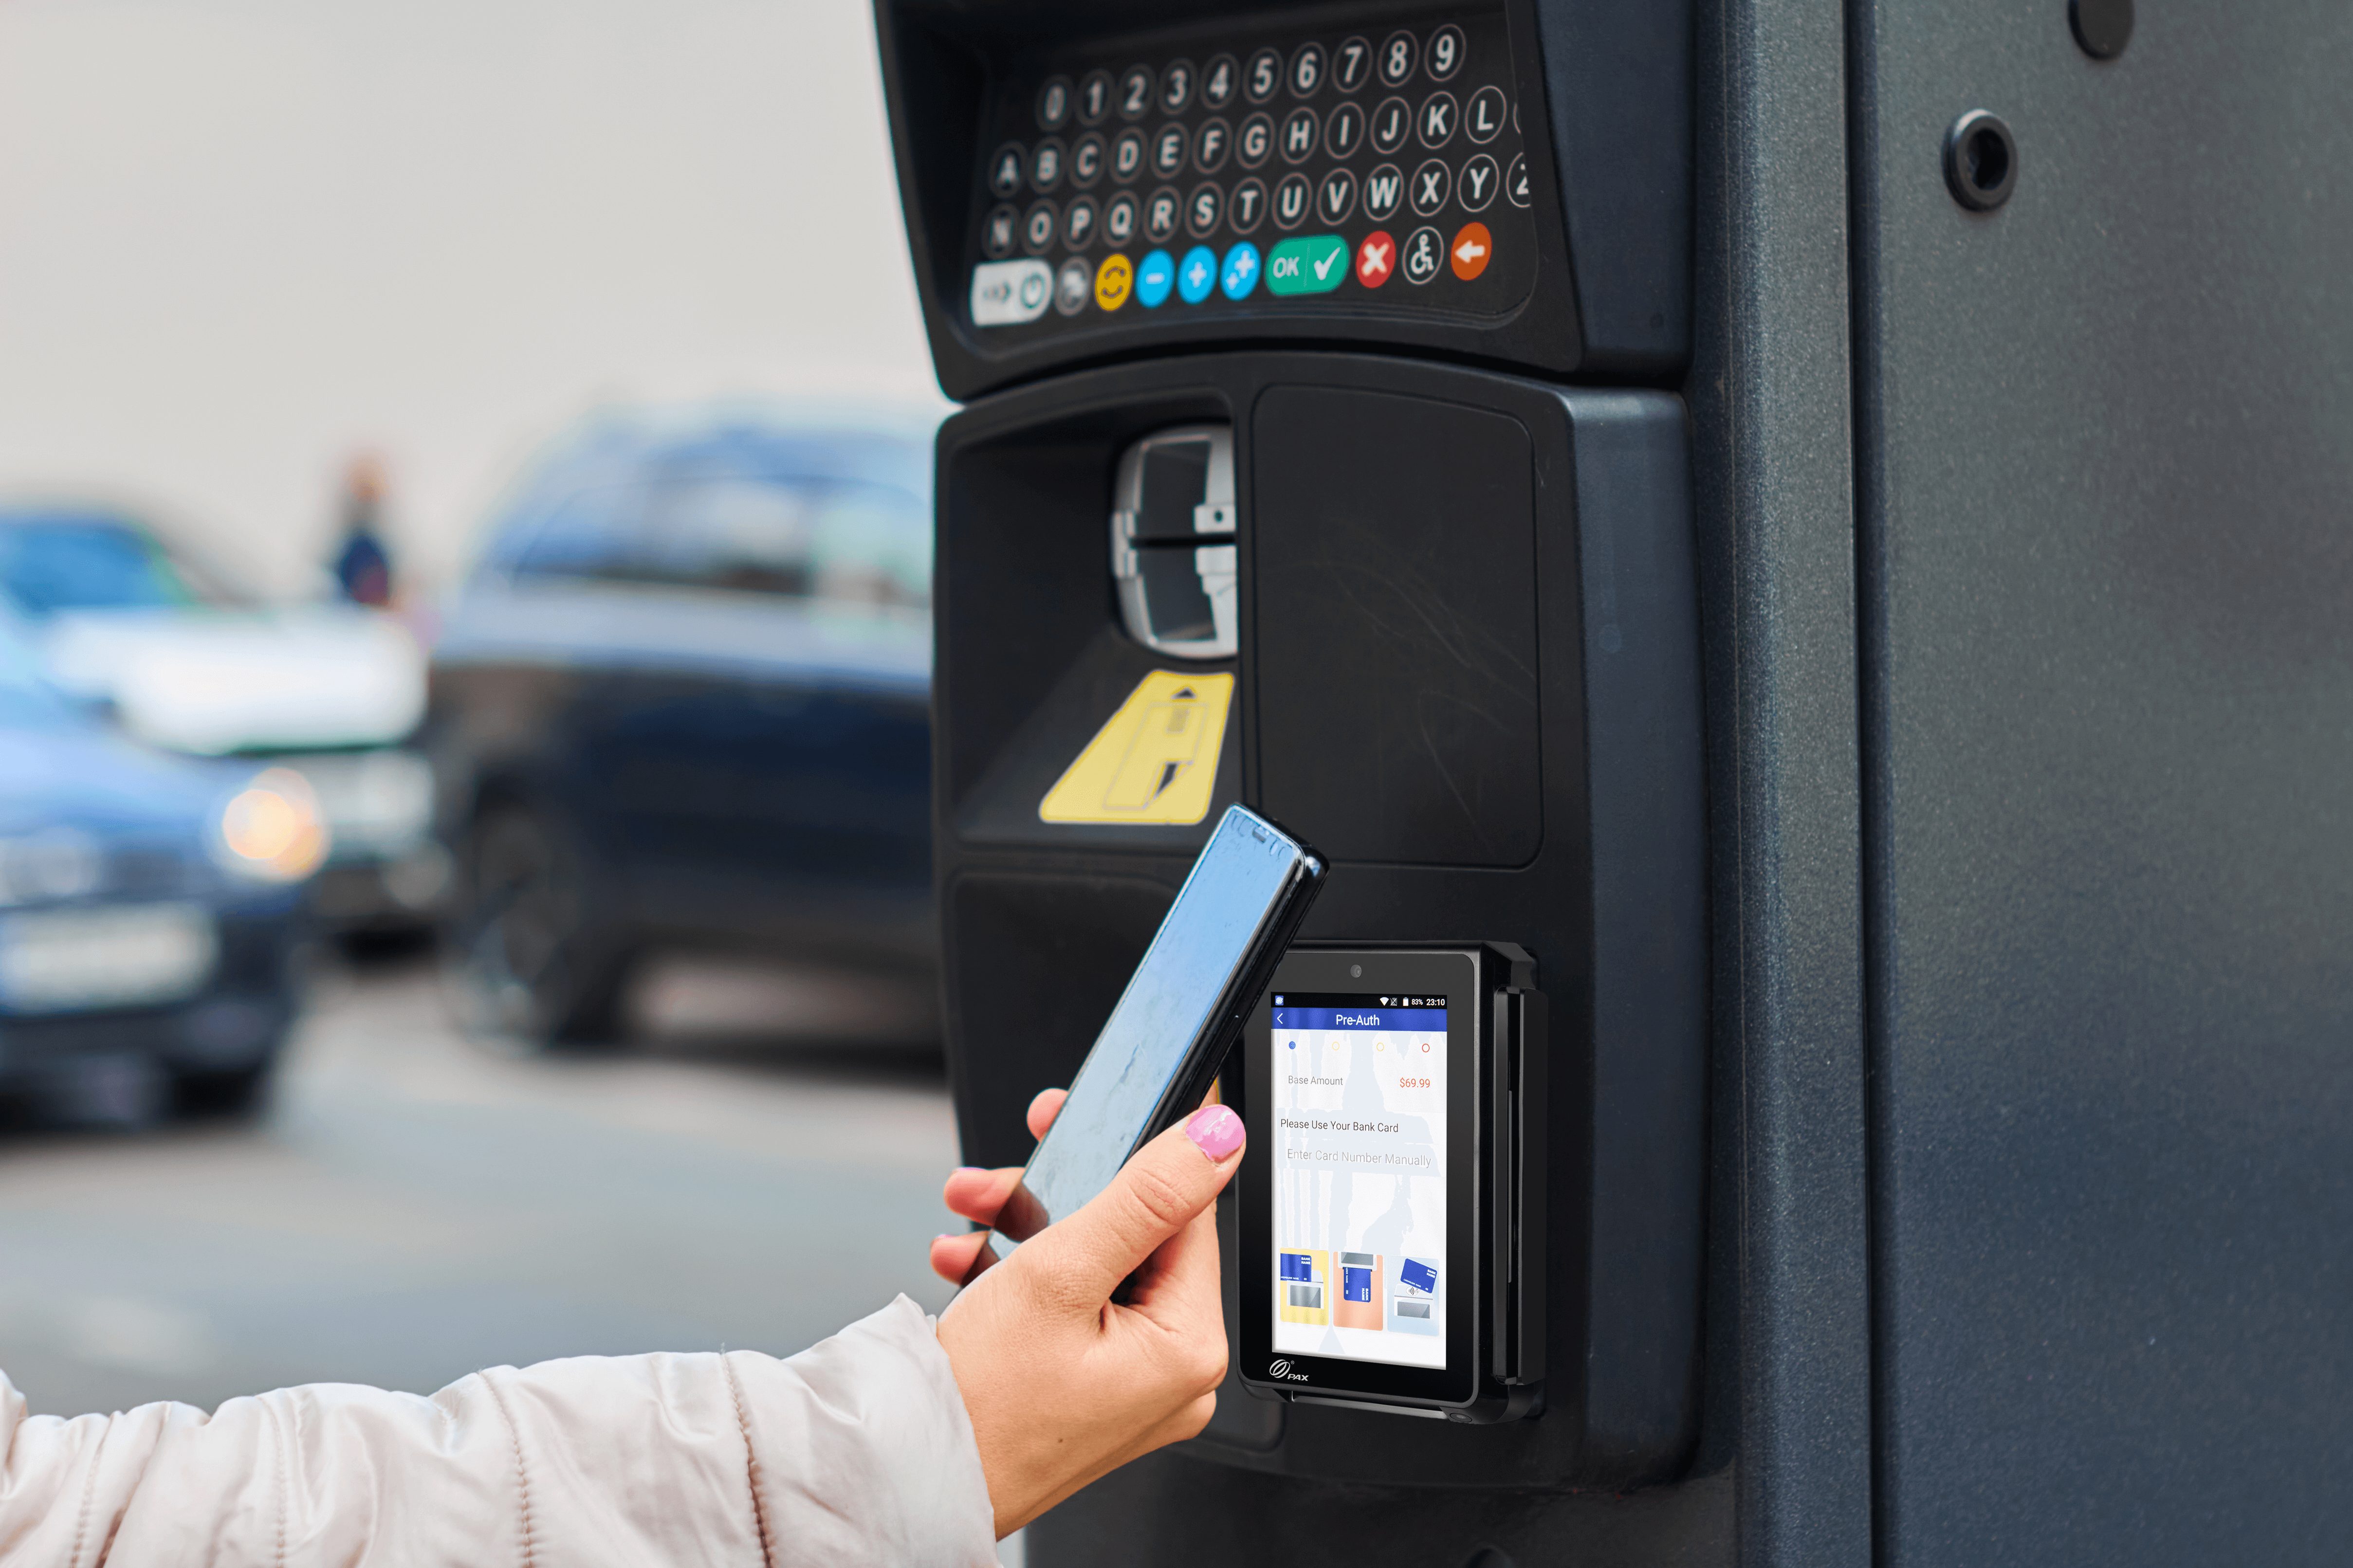 Using phone to pay on an IM30 at a parking kiosk